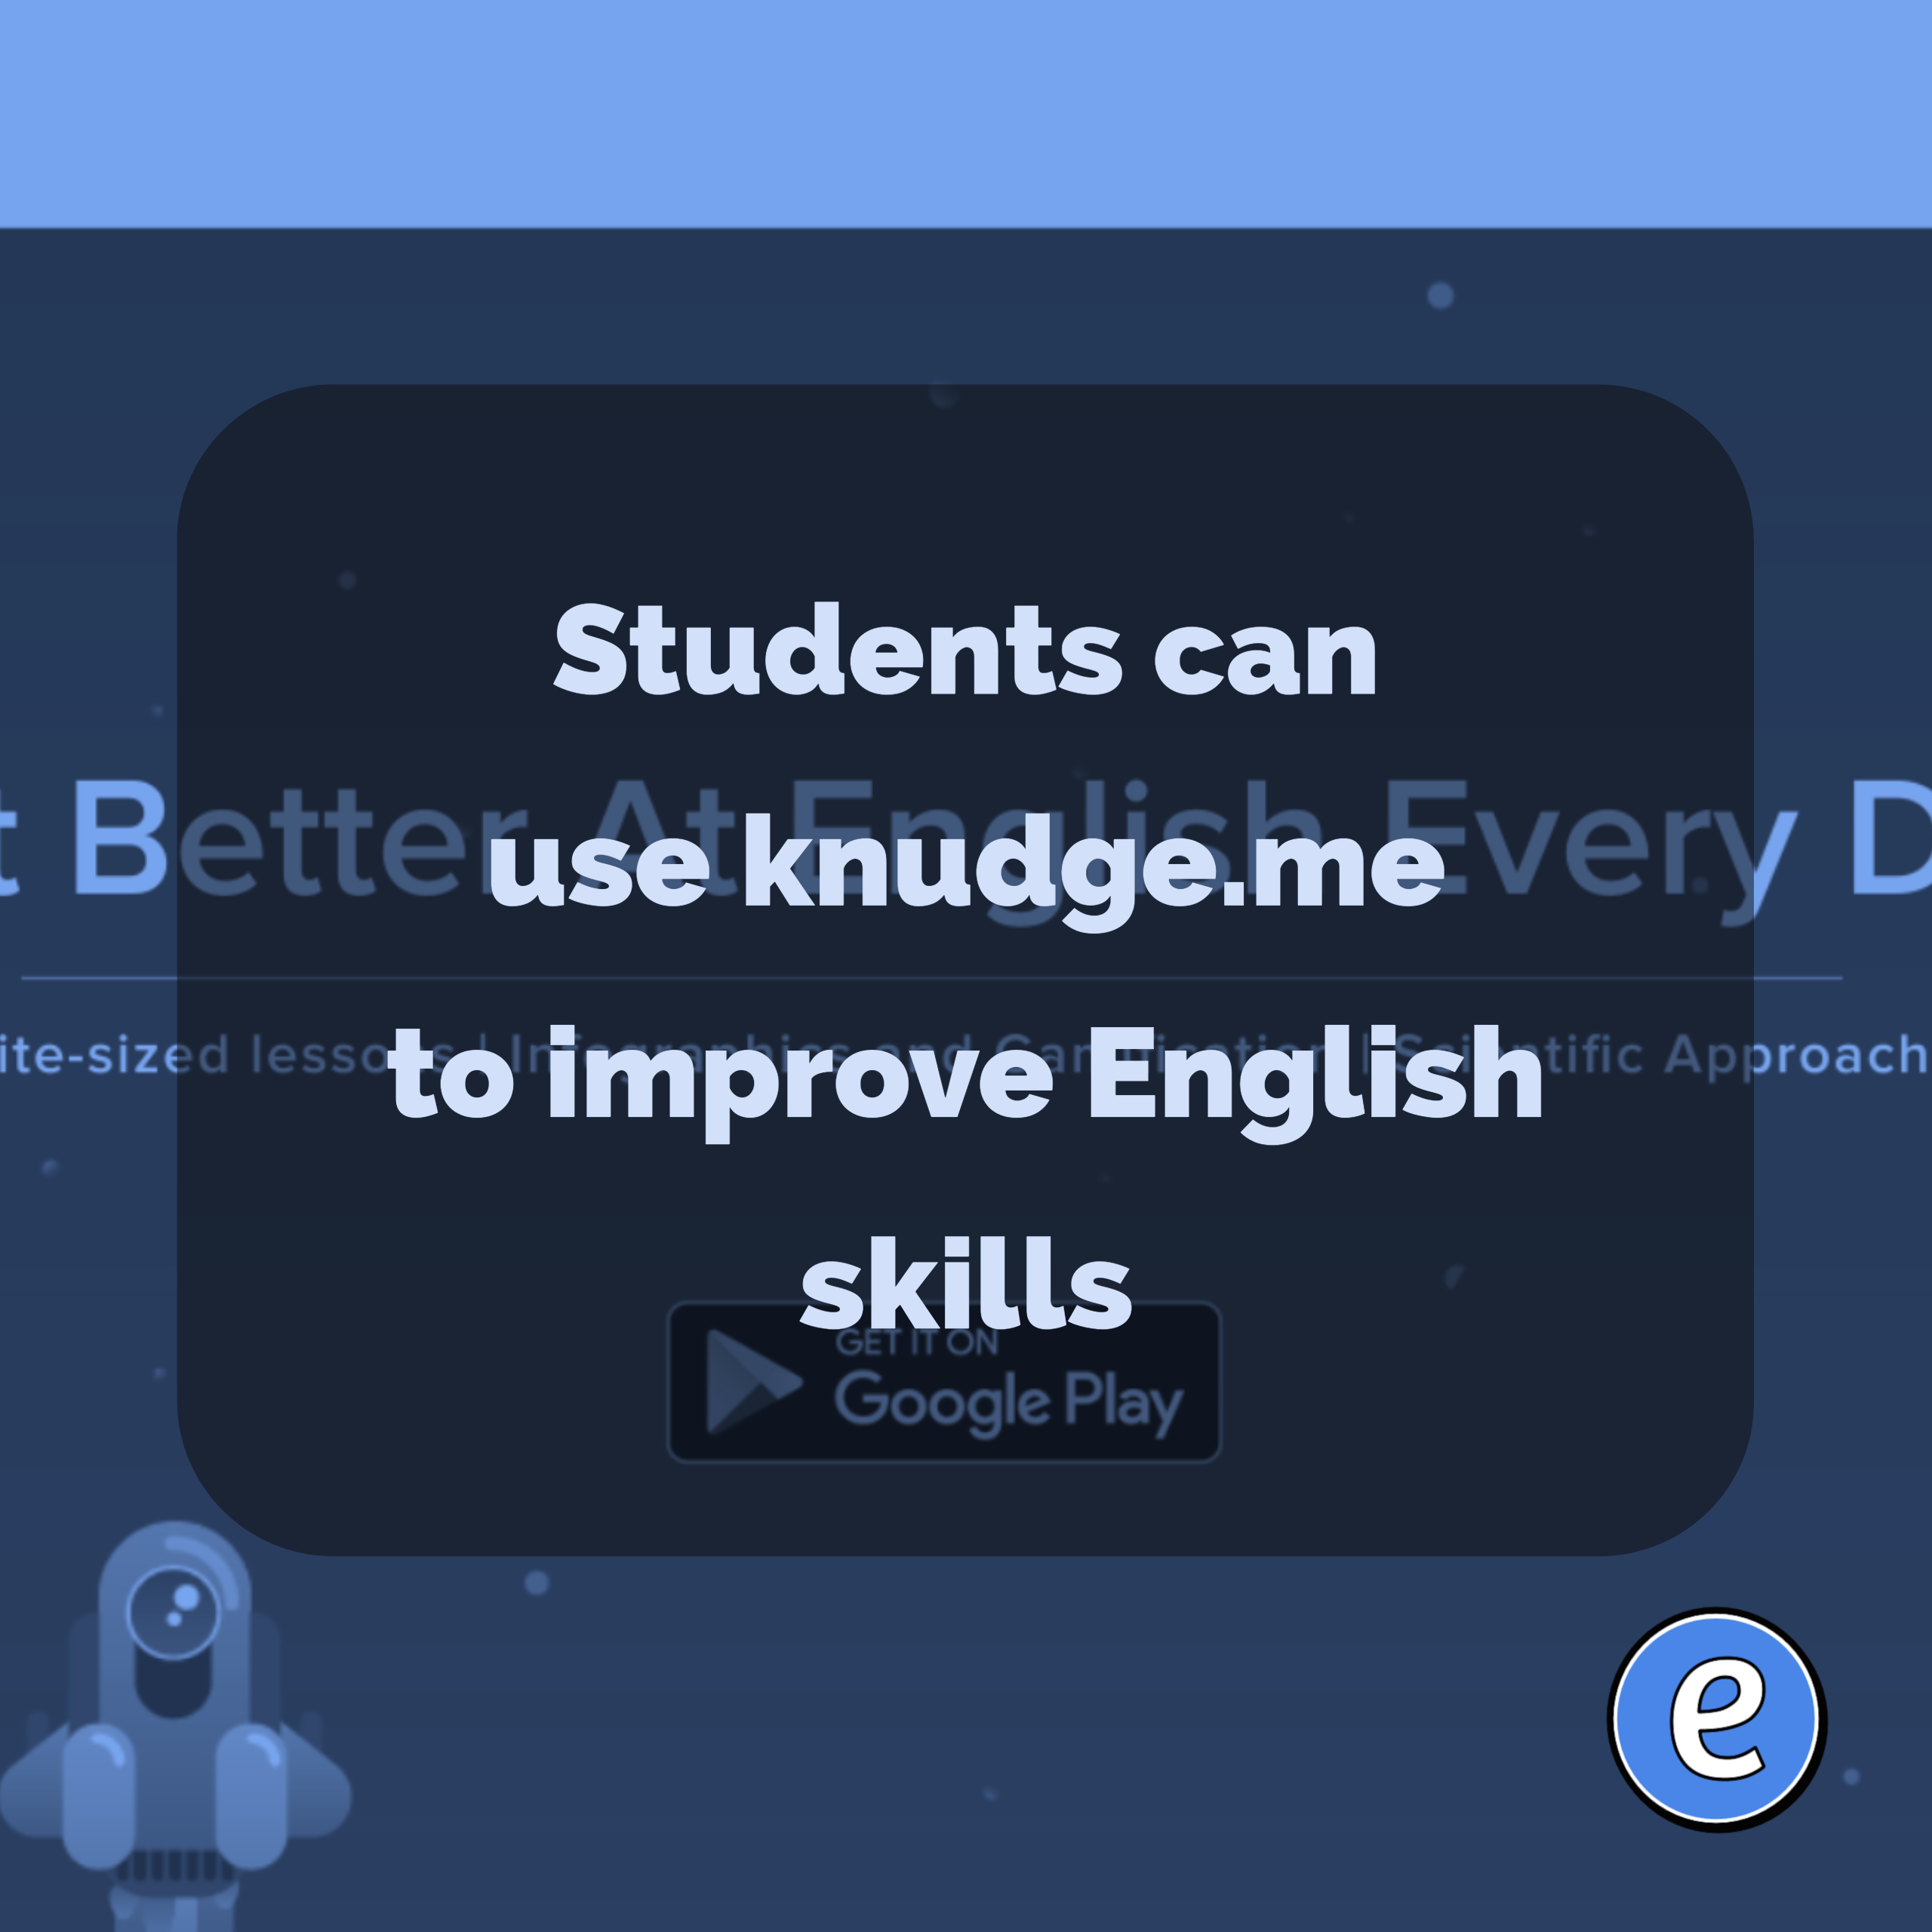 Students can use knudge.me to improve English skills